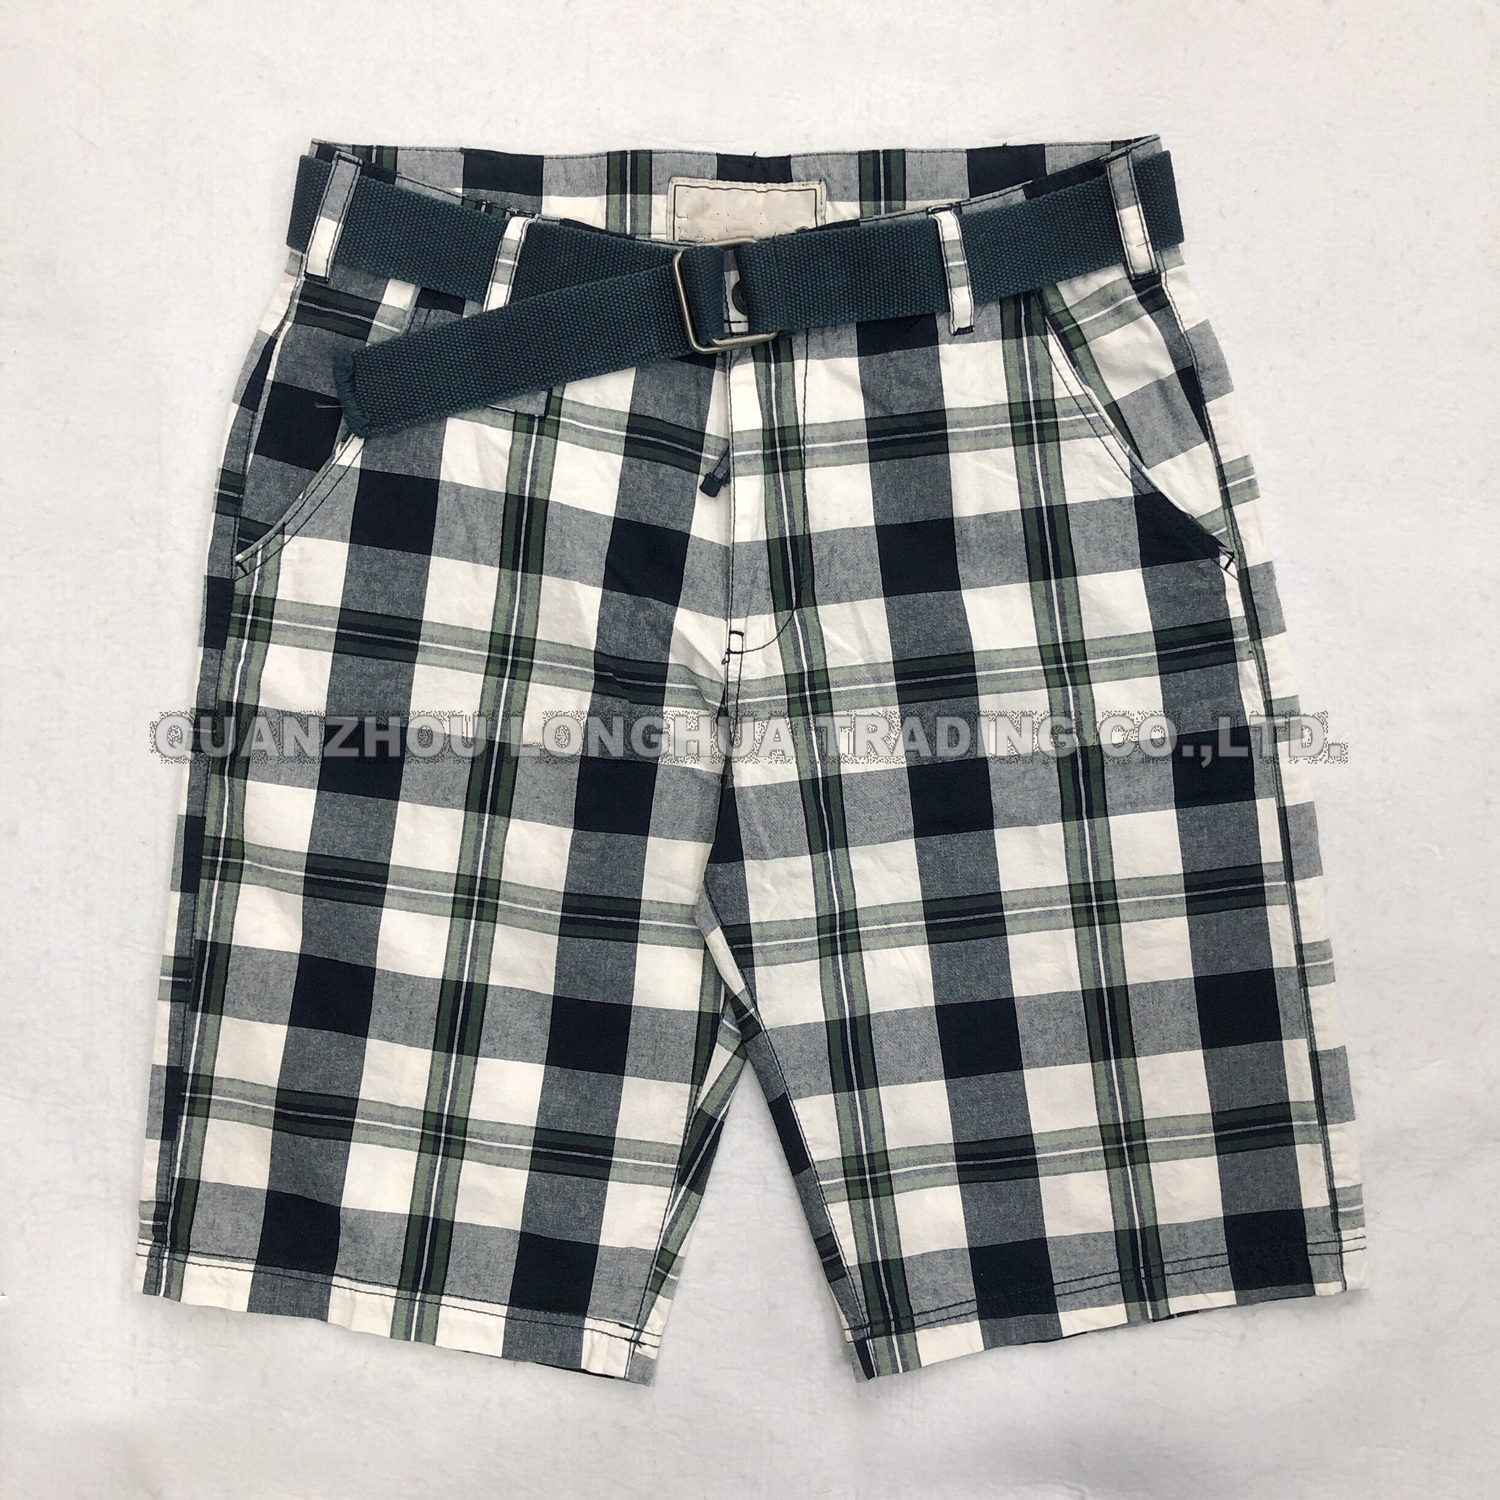 Men′s Boy′s Cargo Shorts Pants Apparel Trousers Plaid Printing Cotton Enzym Wash with Belt